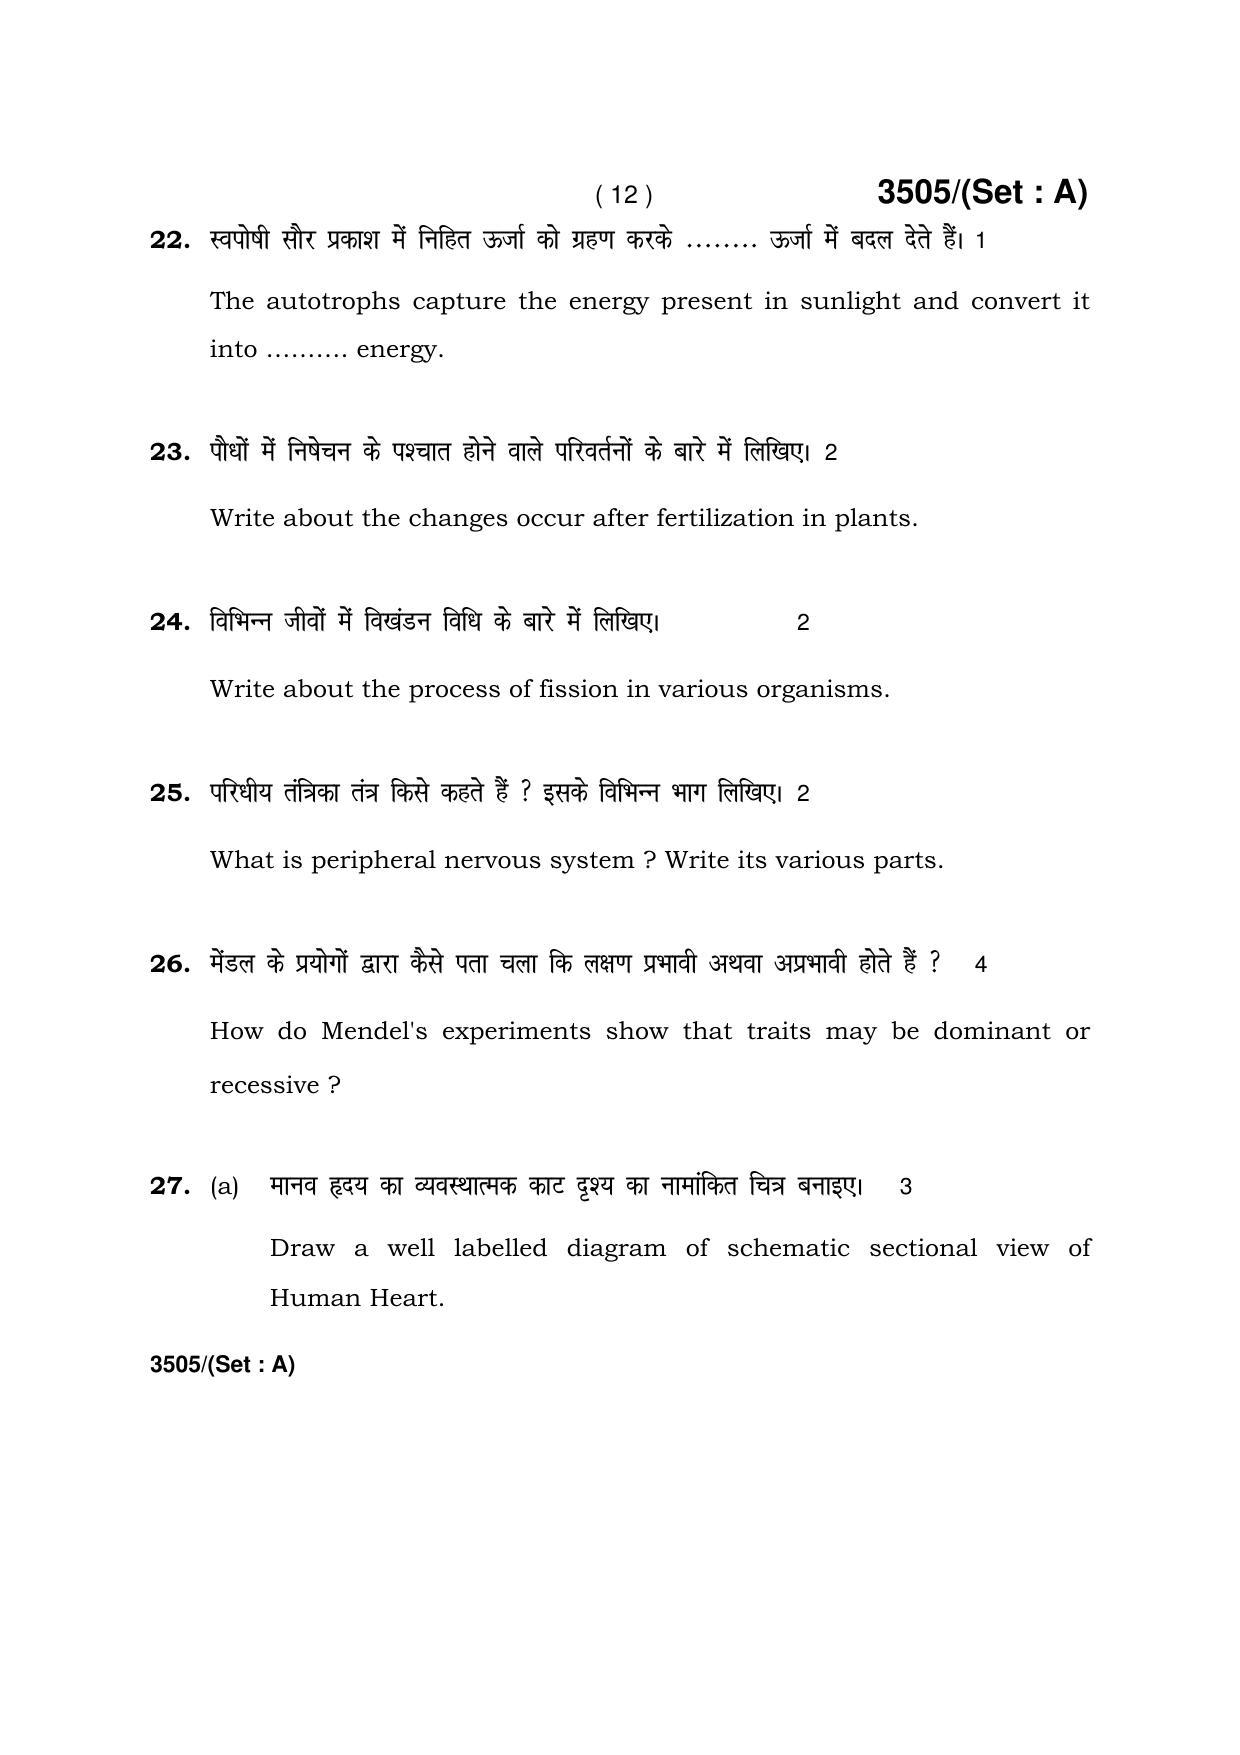 Haryana Board HBSE Class 10 Science -A 2018 Question Paper - Page 12